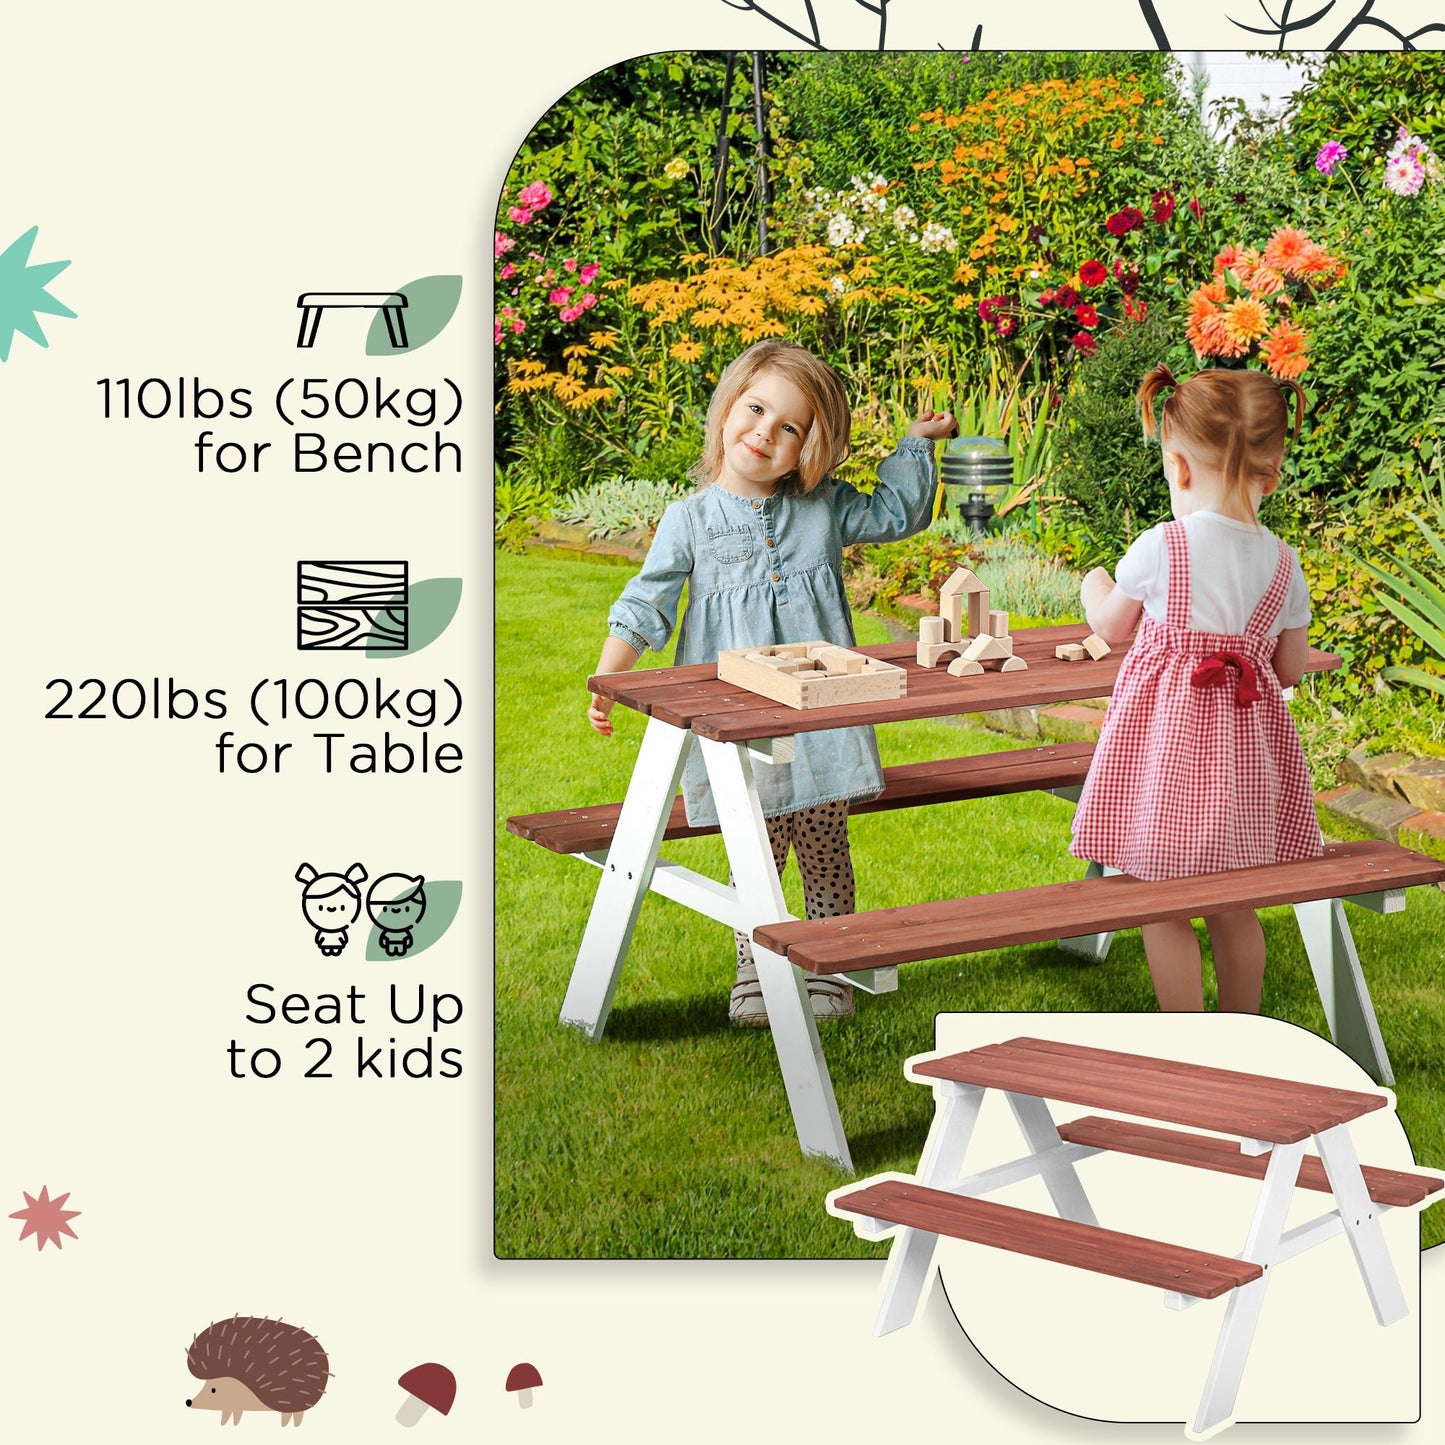 Outdoor and Garden-Kids Wooden Picnic Bench Table, Bench & Table Set, Kids Bench Outdoor Table for Garden, Backyard, Aged 3-8 Years Old, Brown - Outdoor Style Company